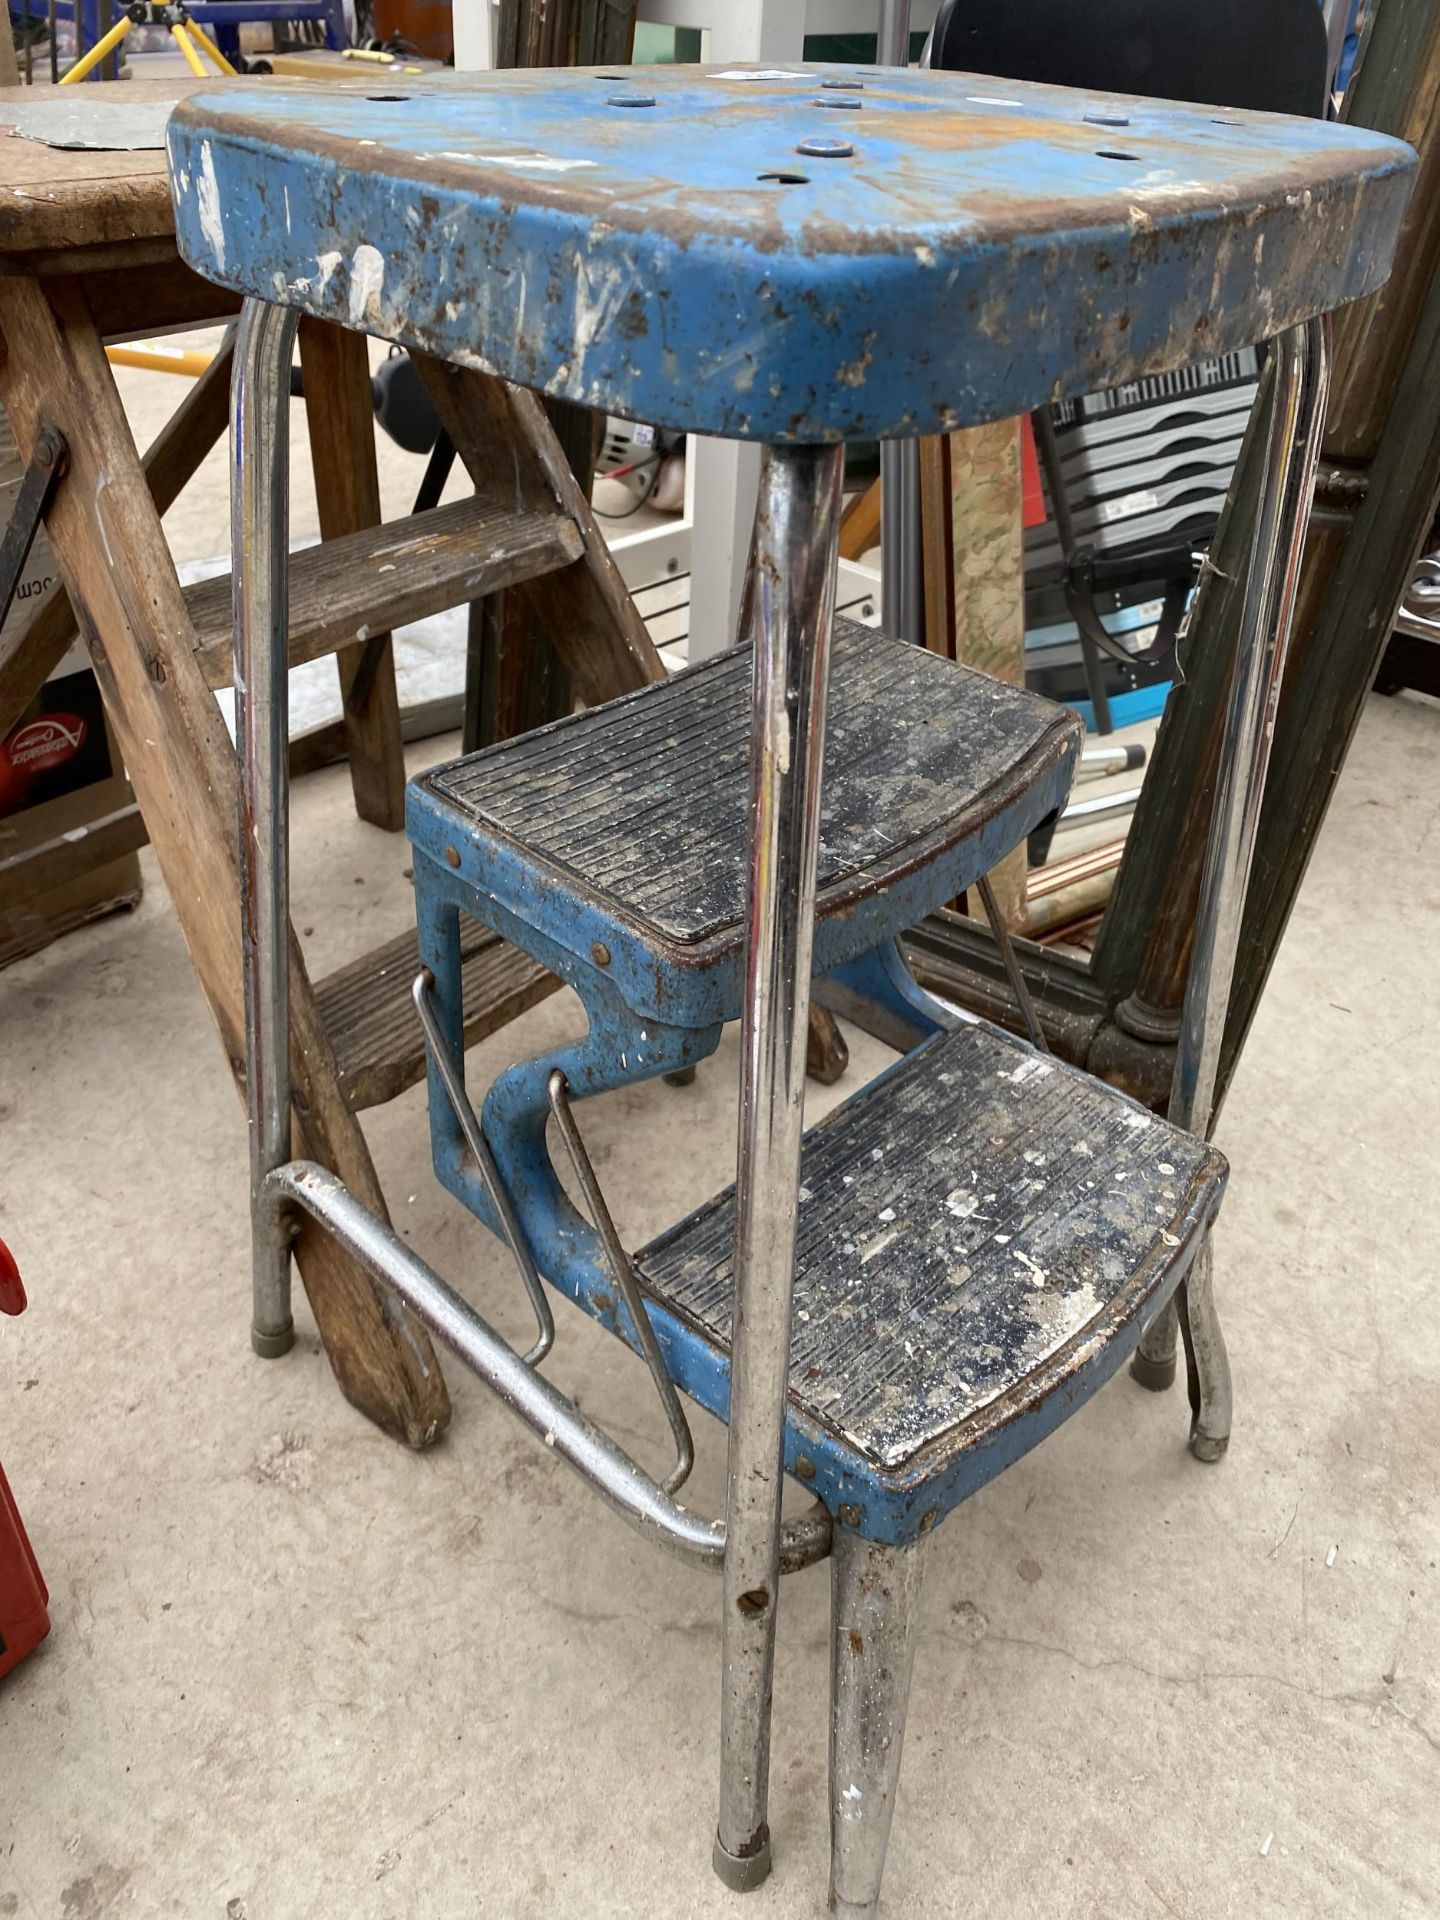 A VINTAGE WOODEN STEP STOOL AND A RETRO FOLDING STEP STOOL - Image 3 of 3